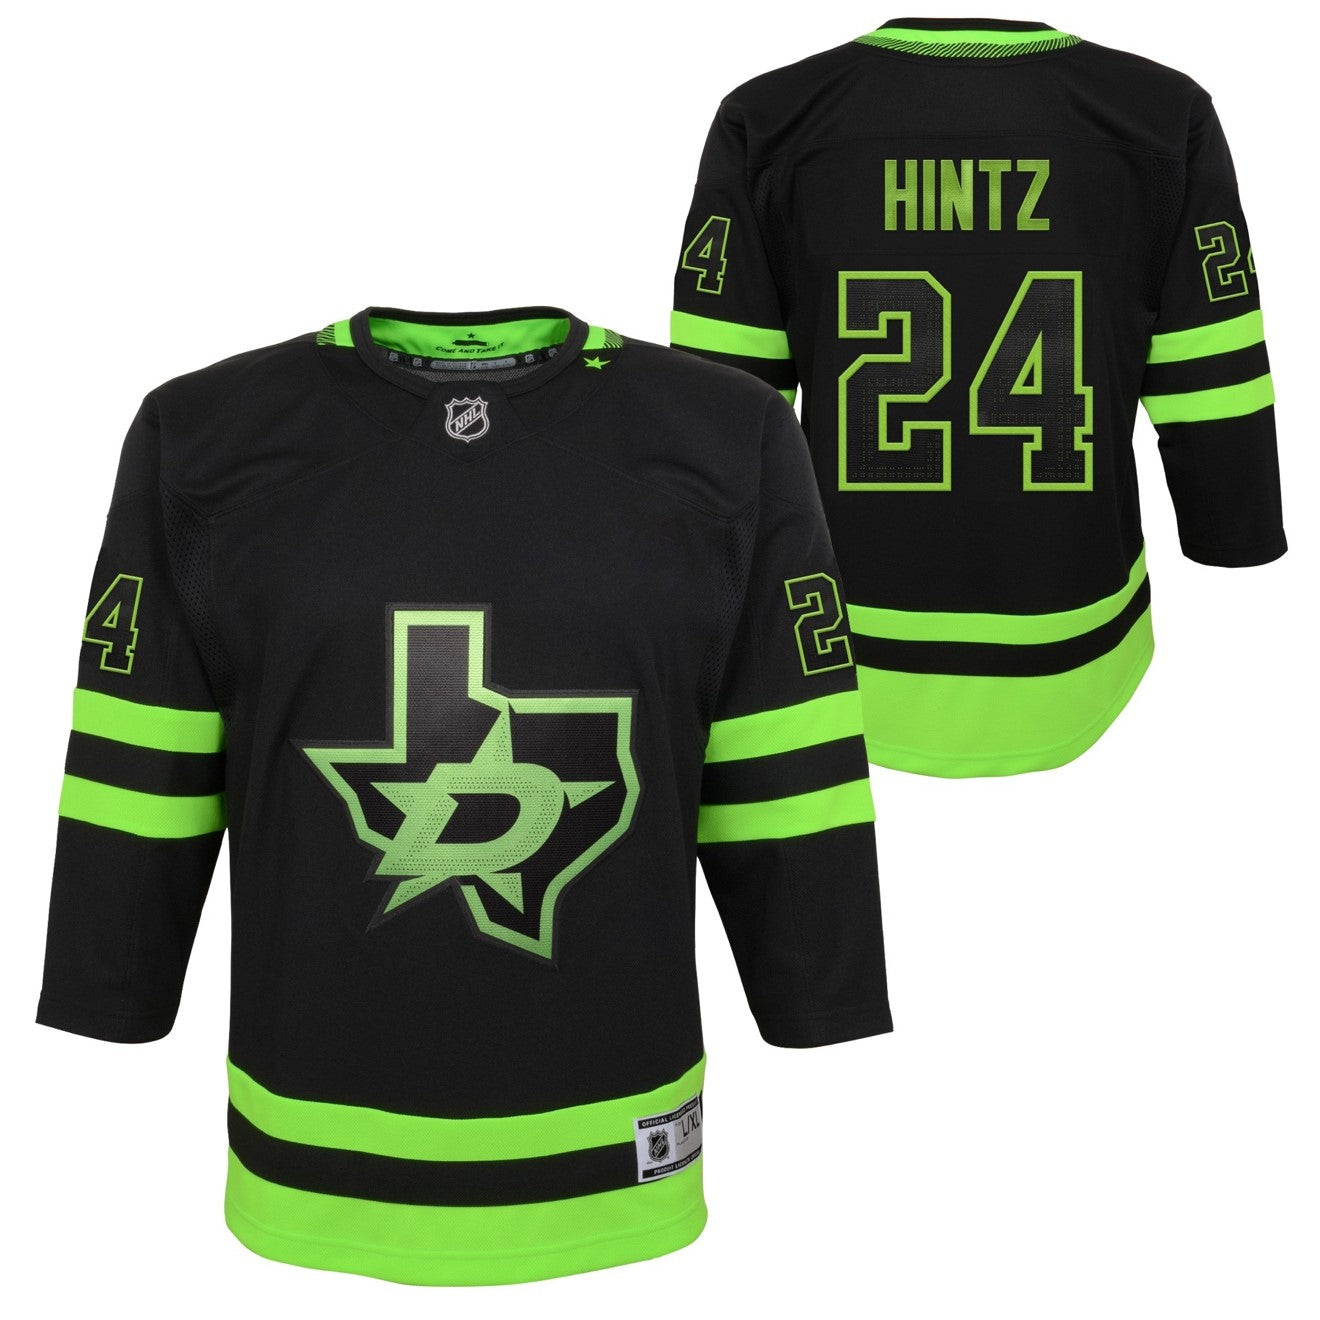 DALLAS STARS OUTERSTUFF YOUTH BLACKOUT ROOPE HINTZ 3RD PREMIER JERSEY